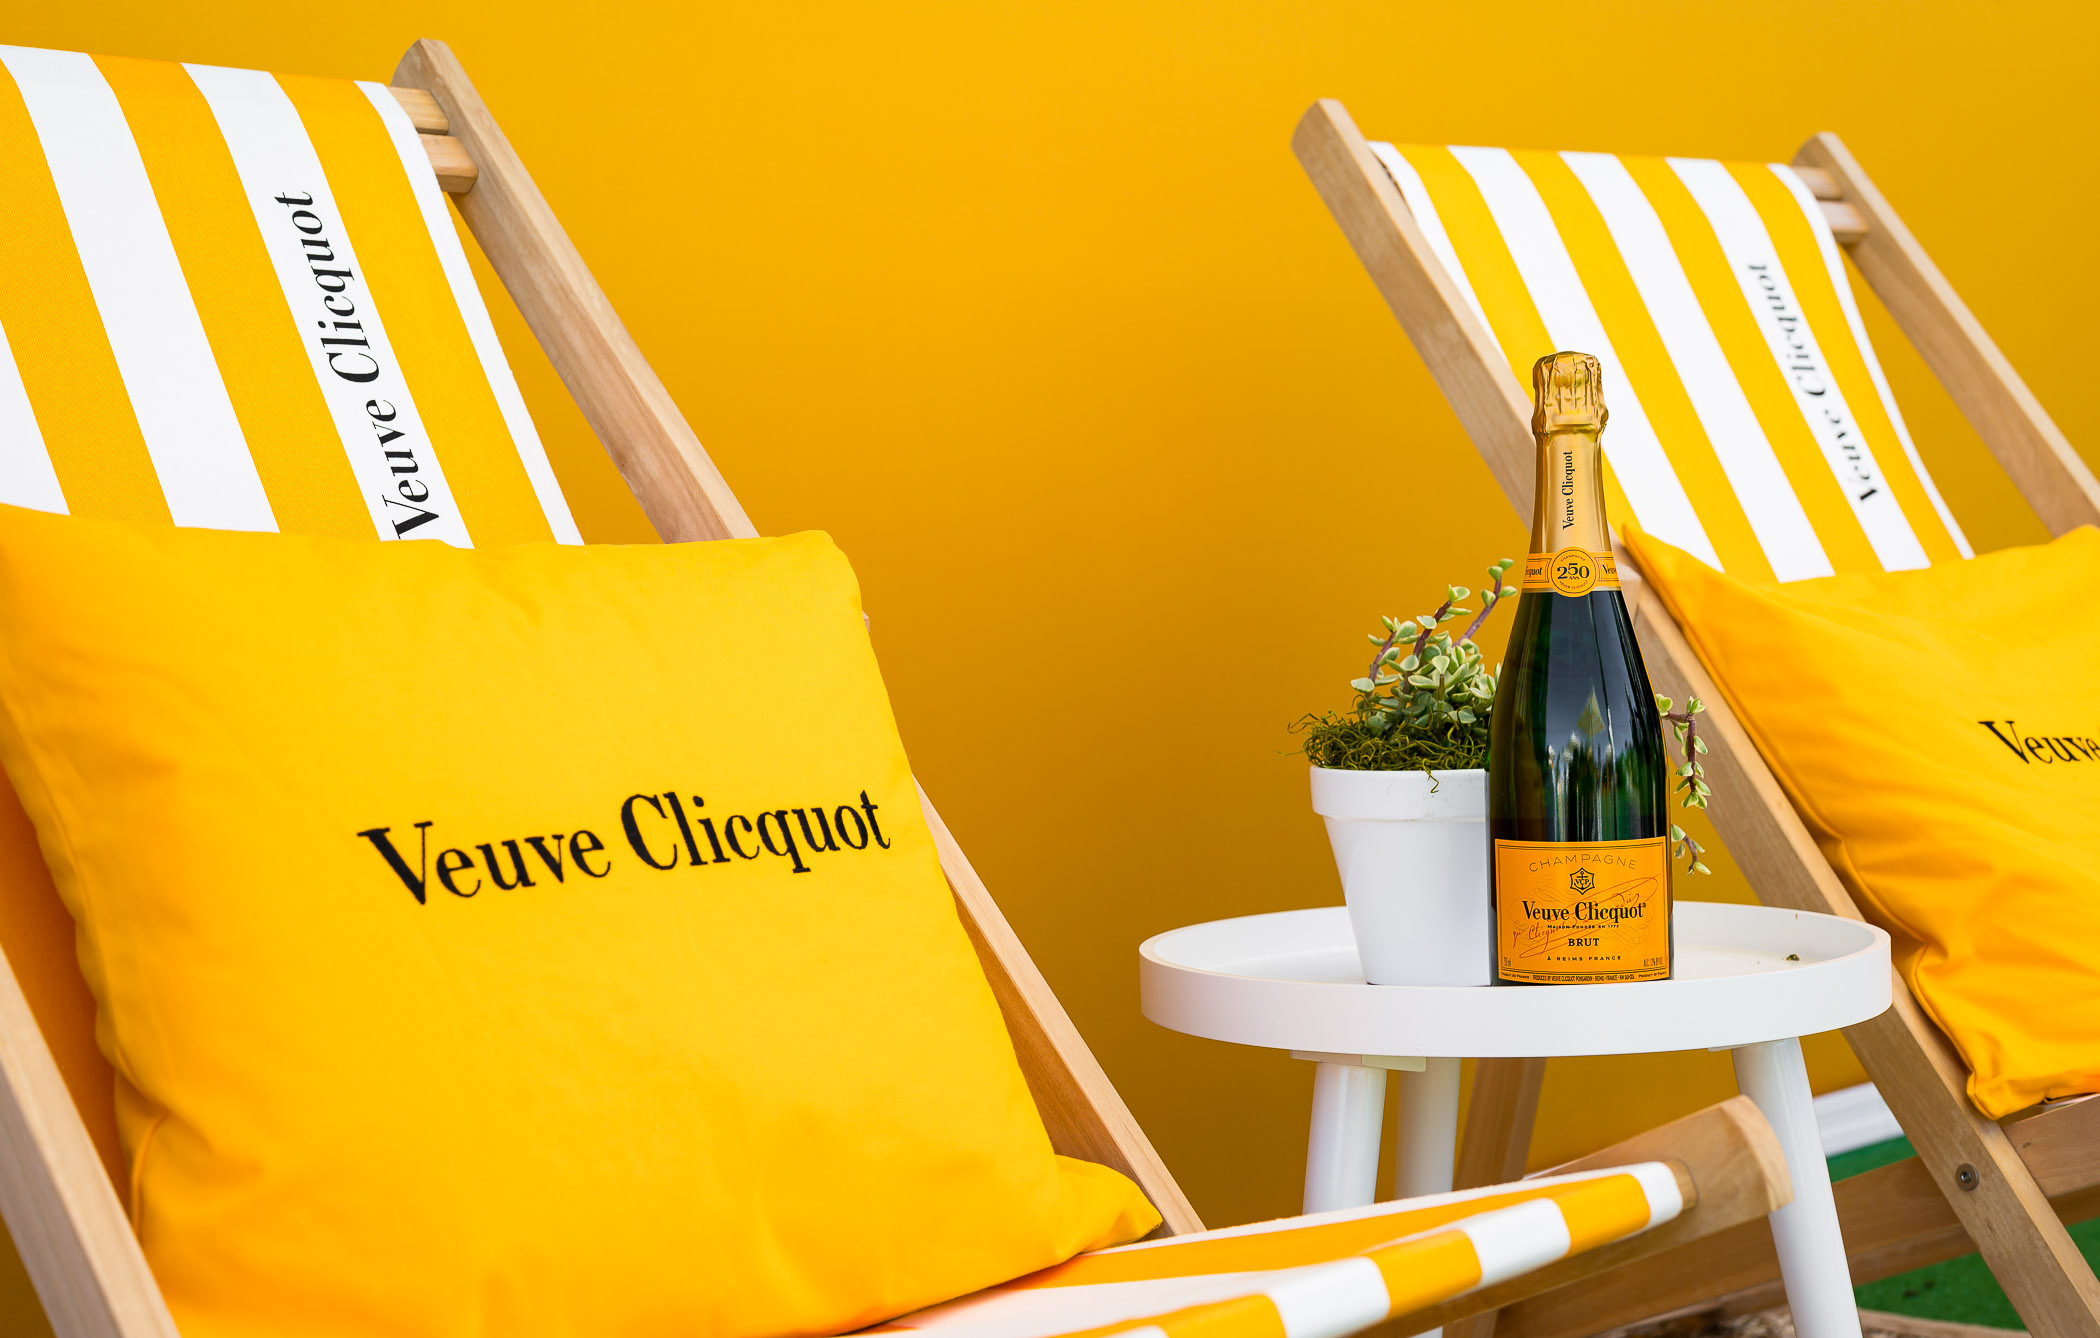 Veuve Clicquot display with chairs and pillows